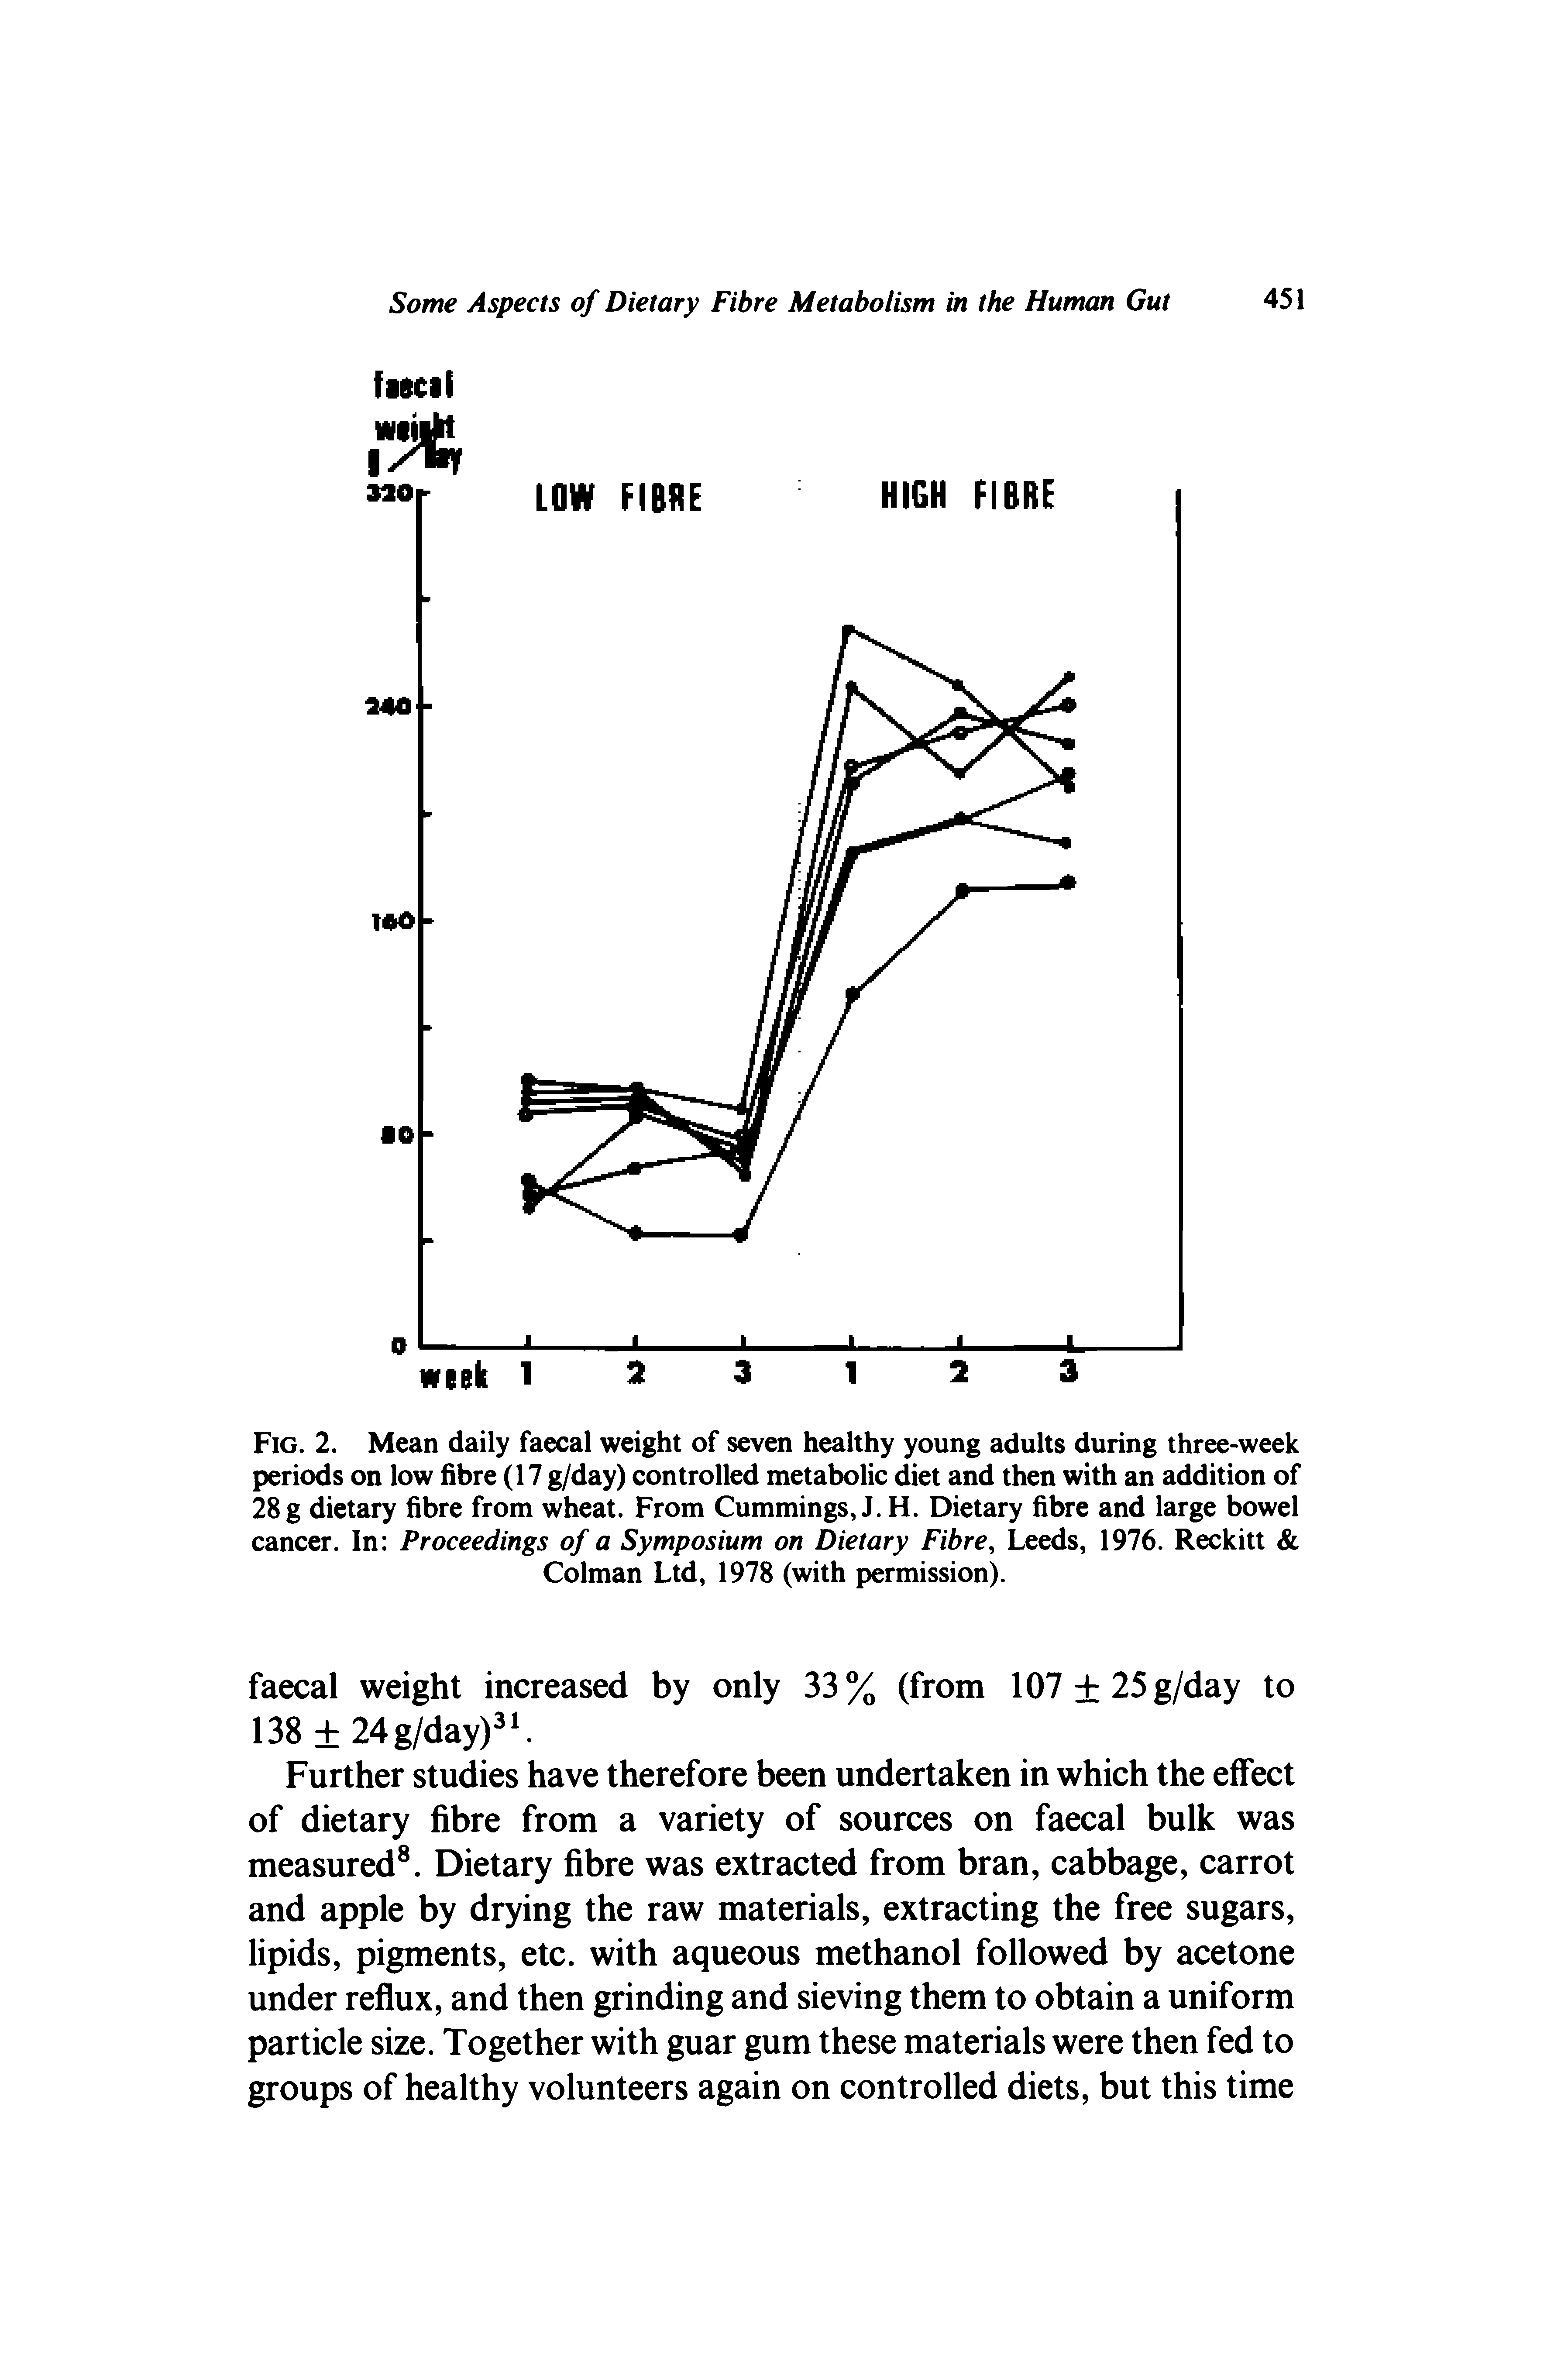 Fig. 2. Mean daily faecal weight of seven healthy young adults during three-week periods on low fibre (17g/day) controlled metabolic diet and then with an addition of 28 g dietary fibre from wheat. From Cummings, J. H. Dietary fibre and large bowel cancer. In Proceedings of a Symposium on Dietary Fibre, Leeds, 1976. Reckitt Colman Ltd, 1978 (with permission).